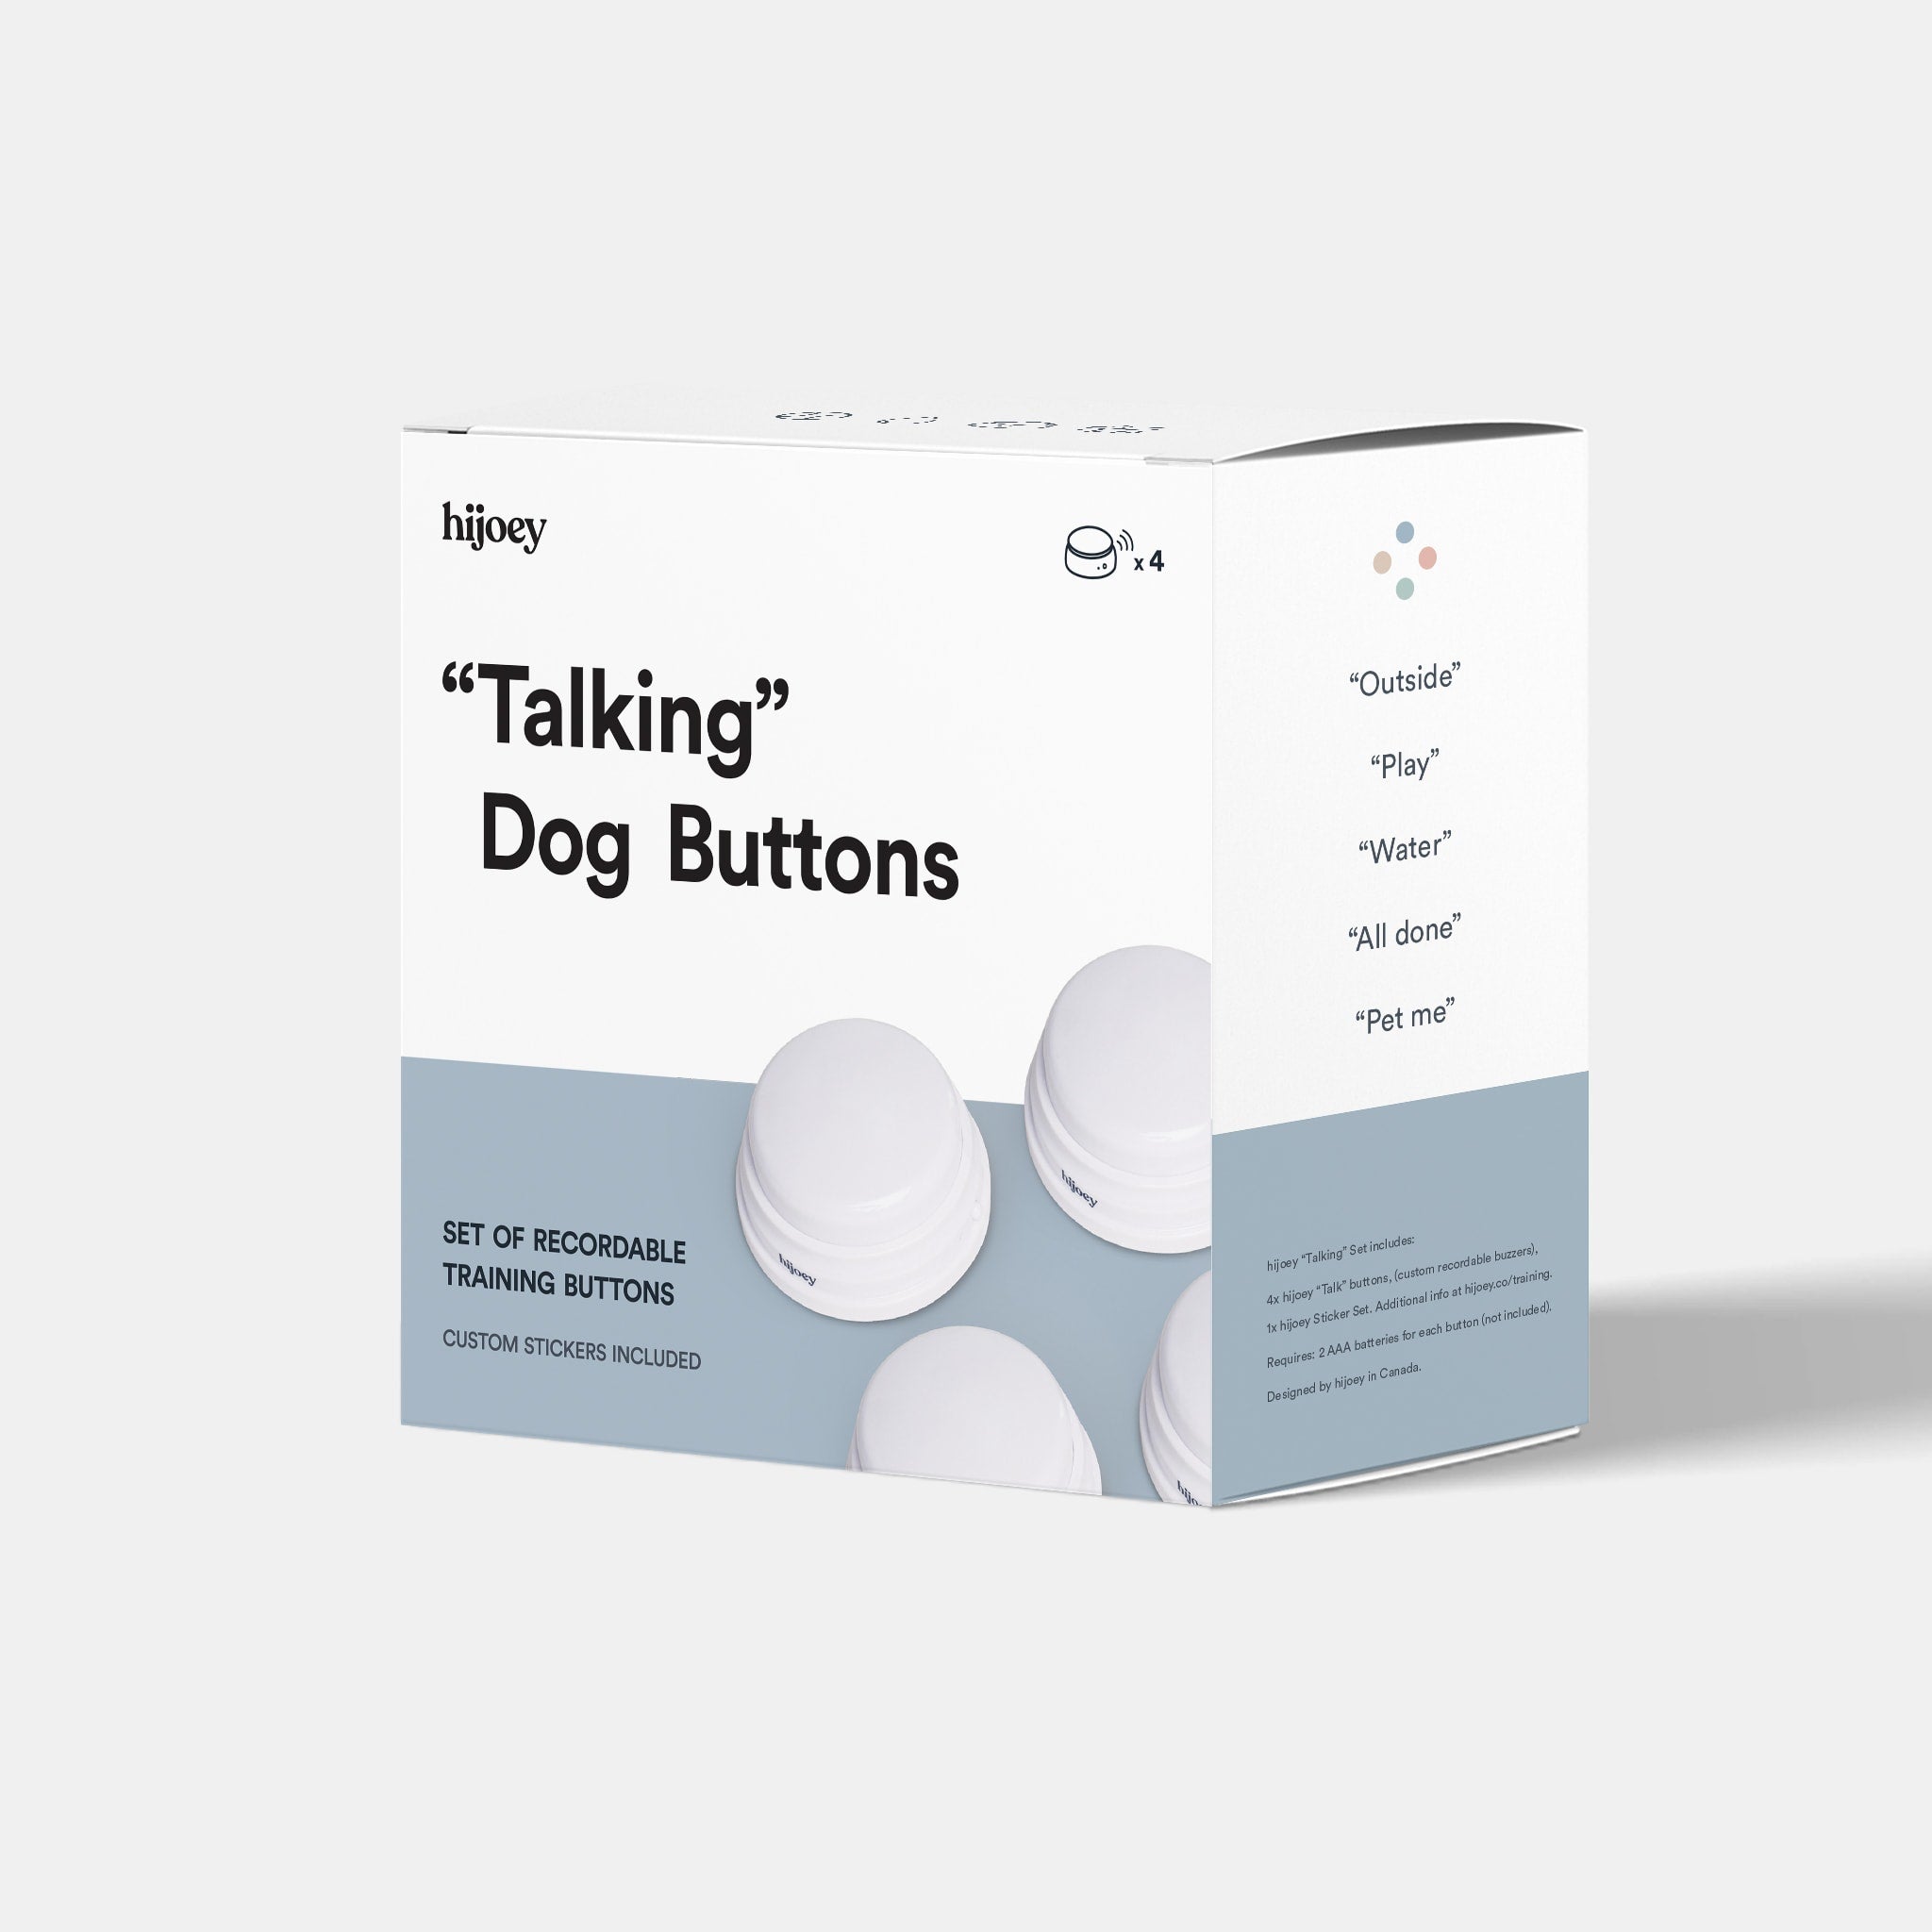 hijoey "Talking" Buttons Set